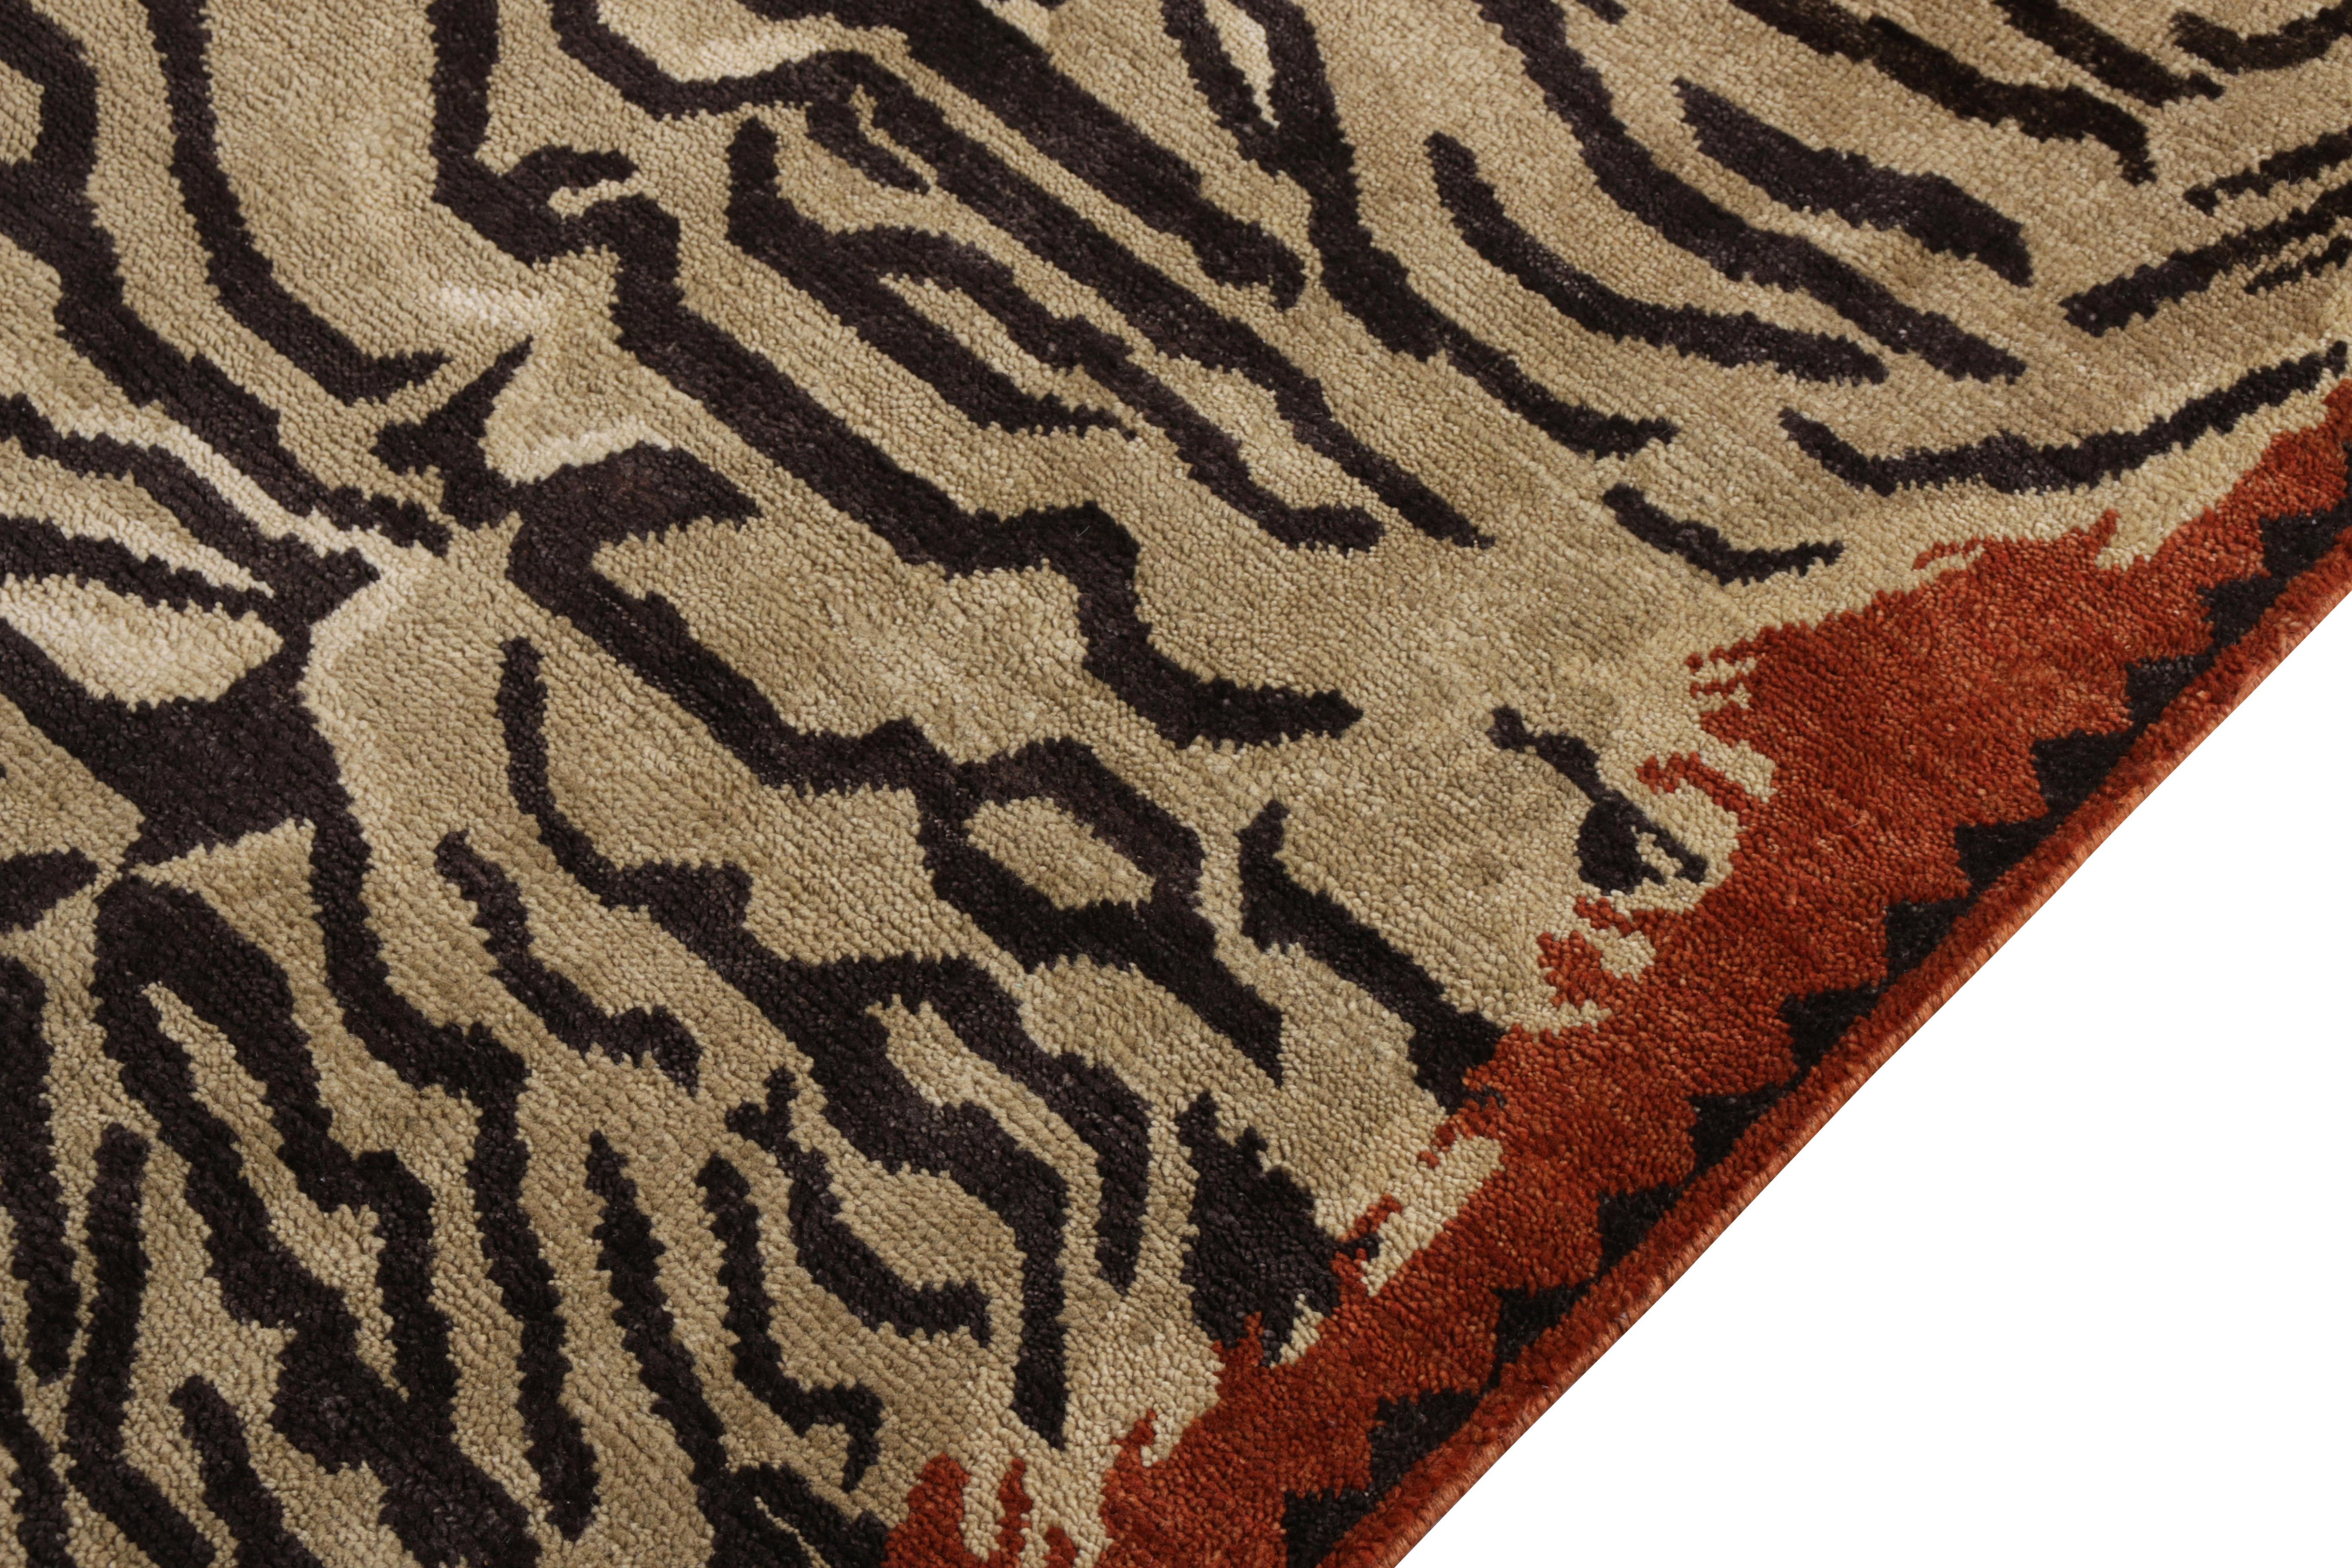 Indian Rug & Kilim's Hand Knotted Tiger Rug in Beige Brown Pictorial Pattern